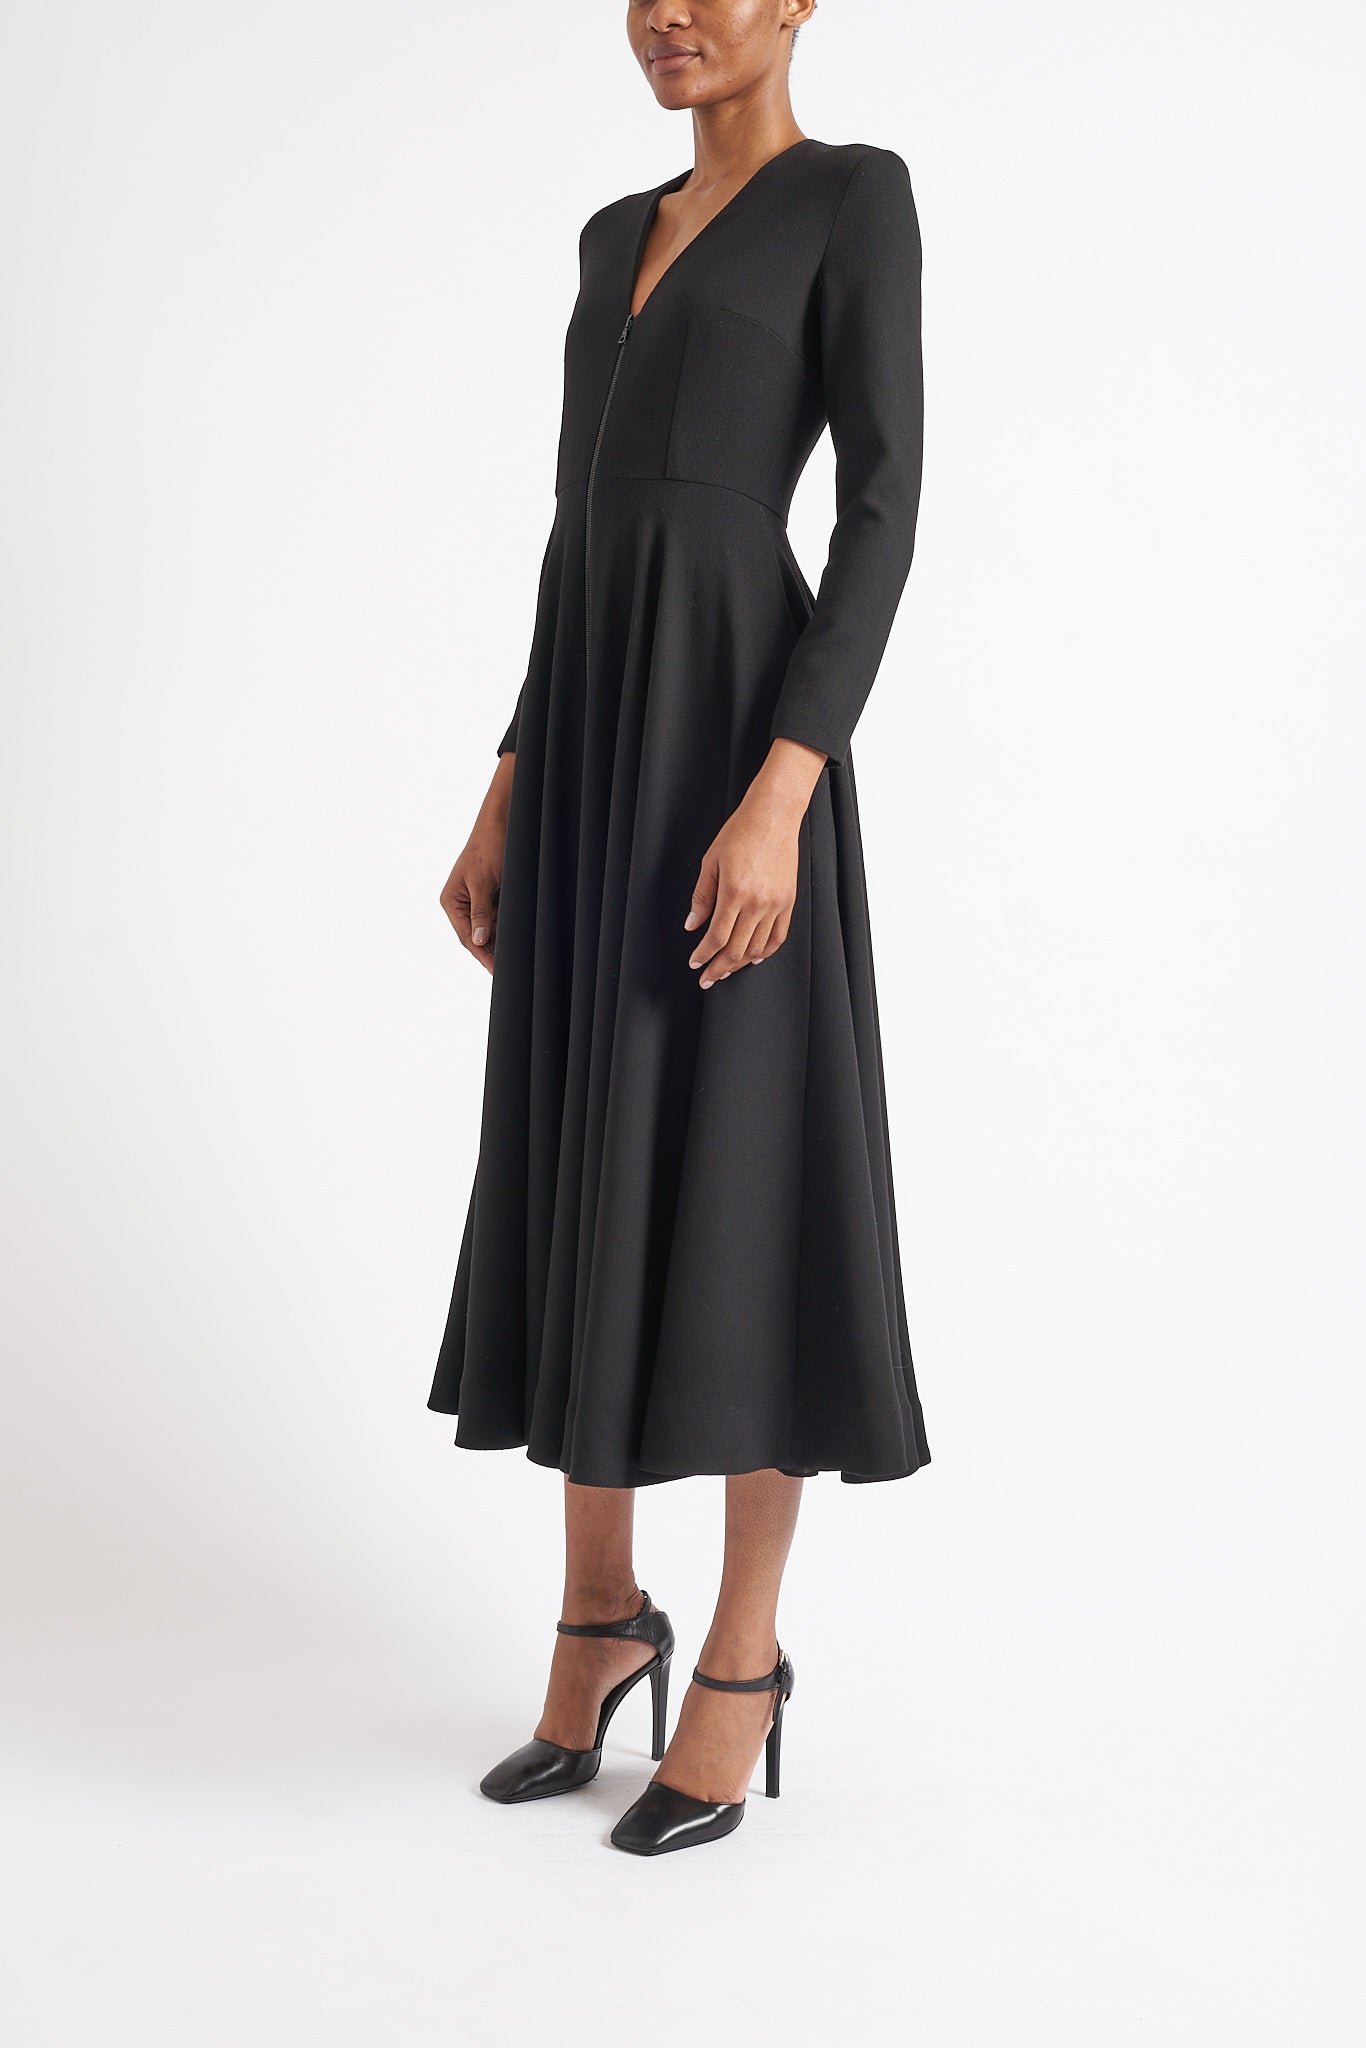 CASS BLACK SUSTAINABLY SOURCED CADY DRESS